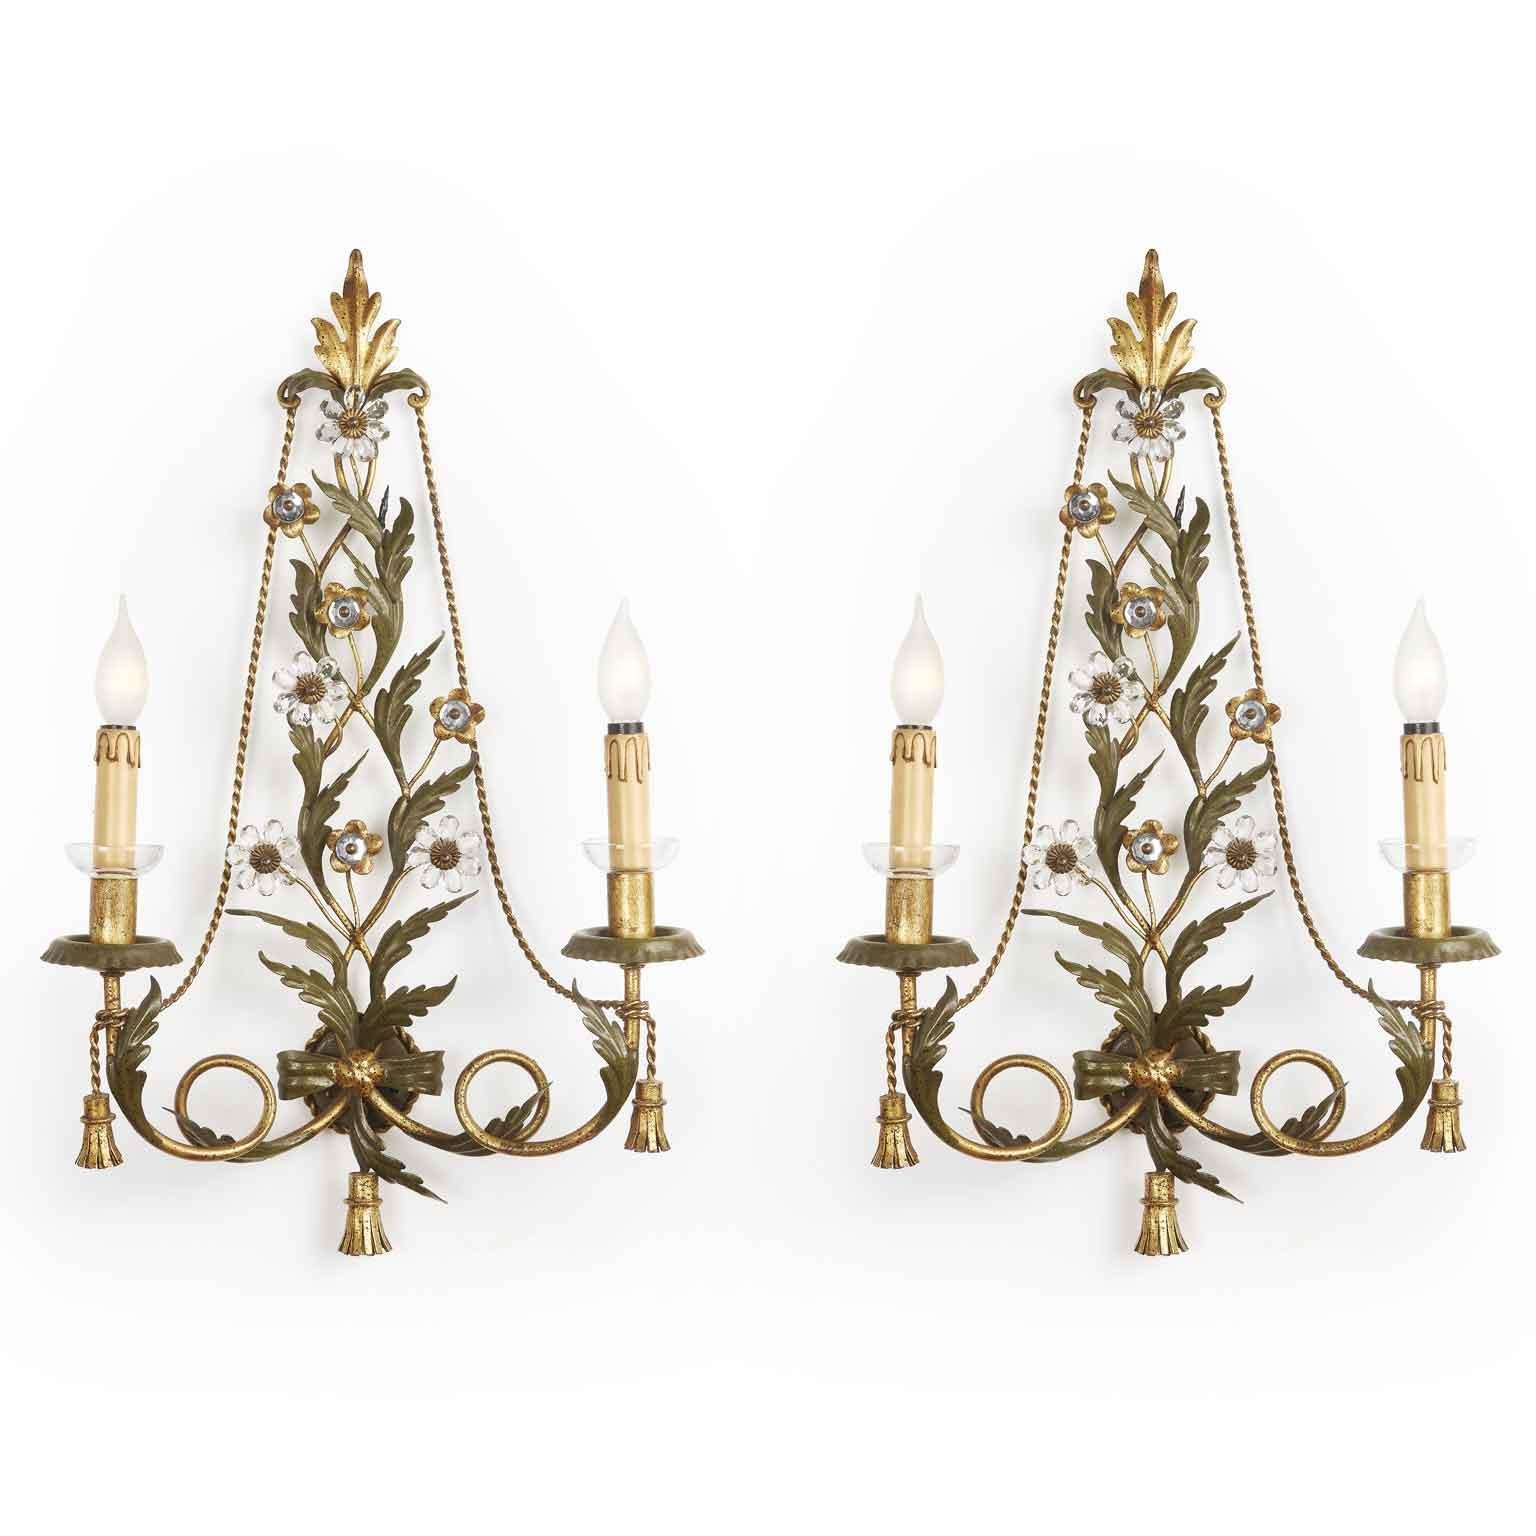 From Italy a Florentine vintage pair of sconces, two olive green painted and partially gilt two-light iron sconces by Banci, manufactured by Banci Firenze, decorated with crystal flowers. 
These original Italian iron wall-lights are realized with a